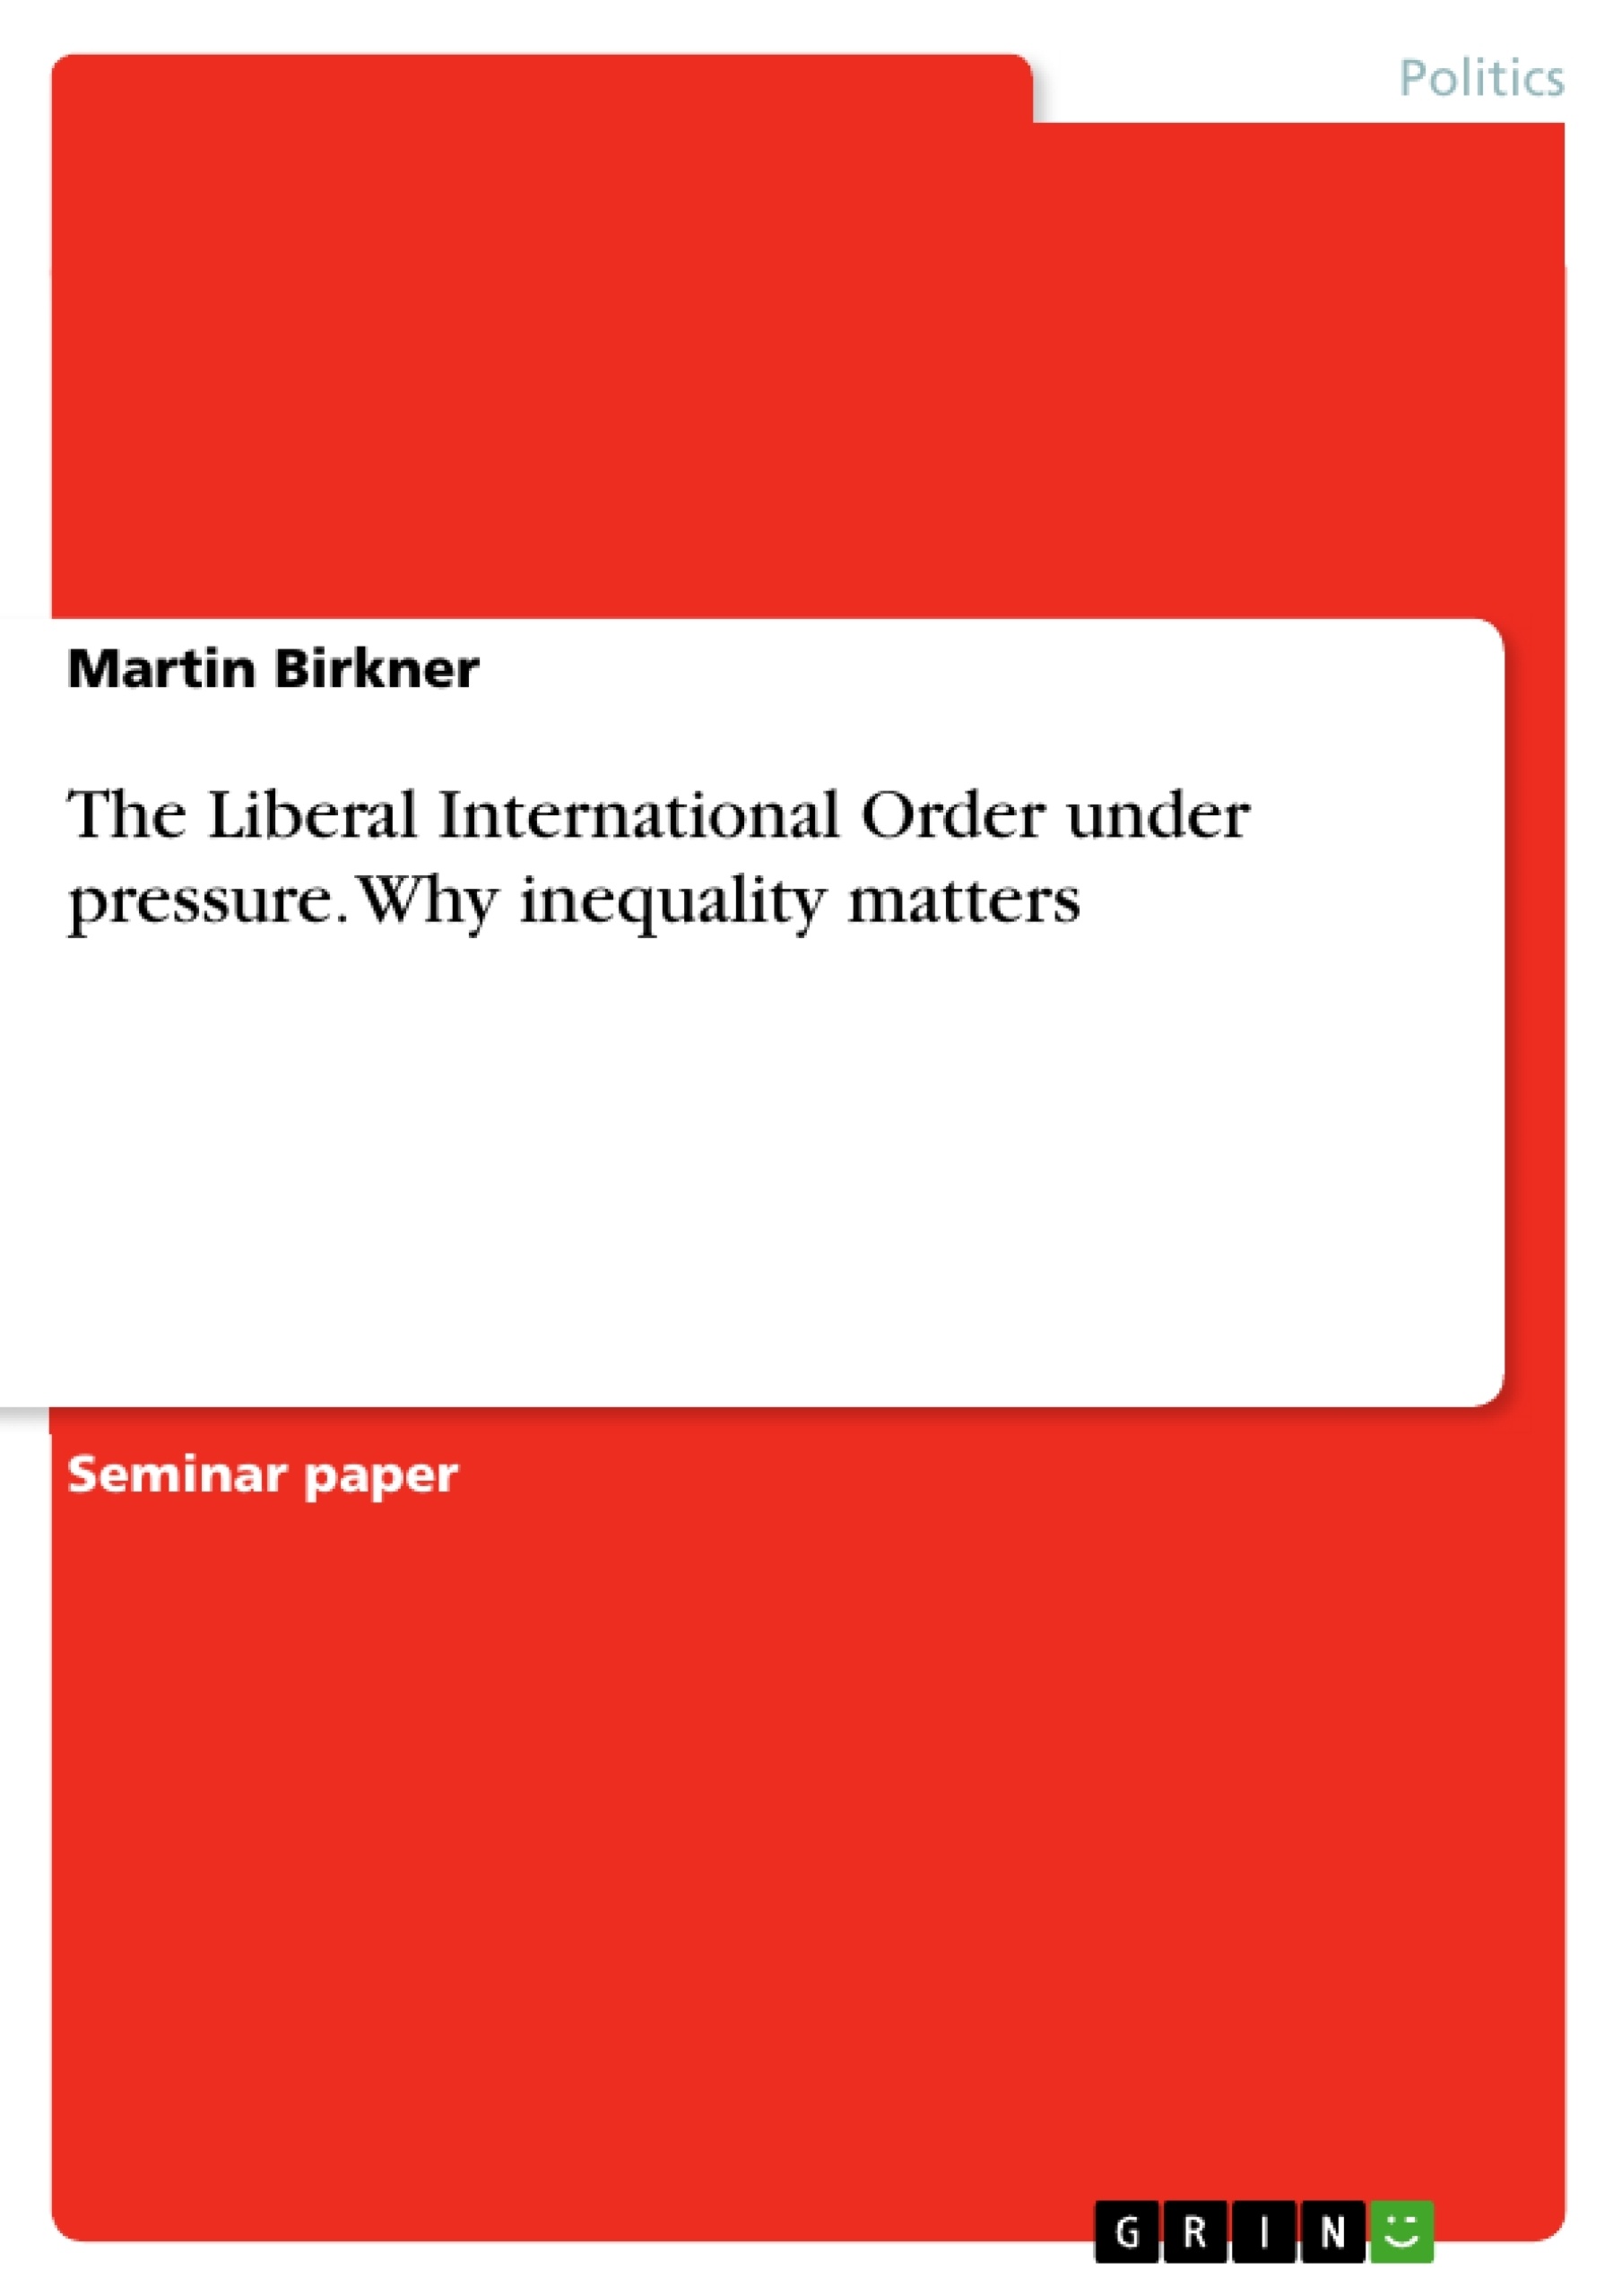 Title: The Liberal International Order under pressure. Why inequality matters